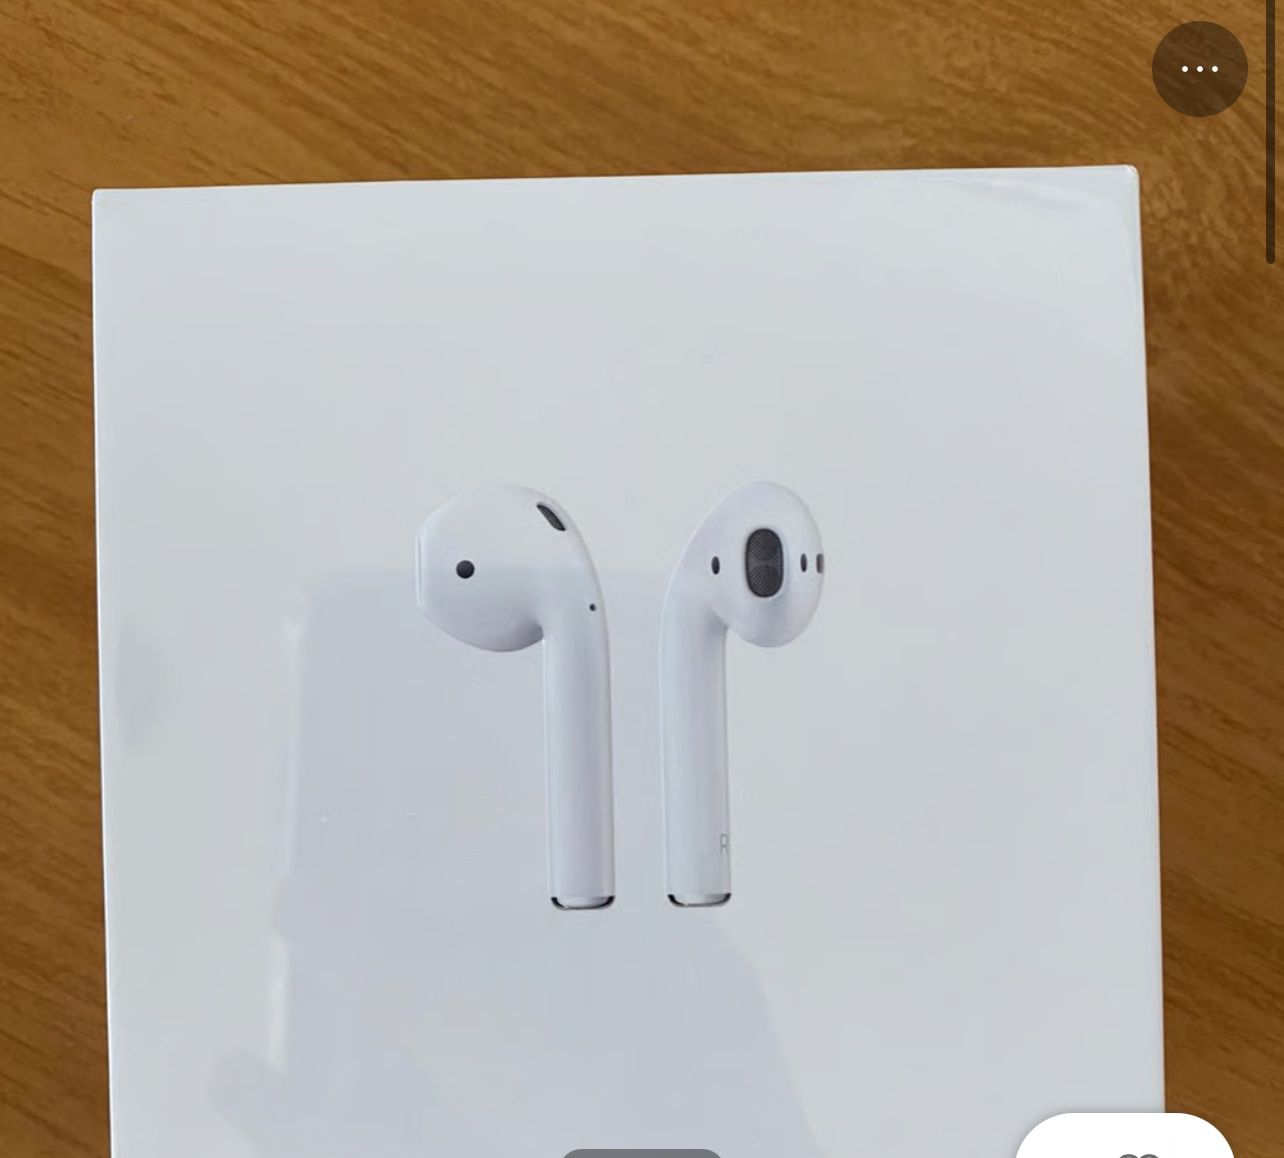 1st Gen AirPods Brand New Never Opened